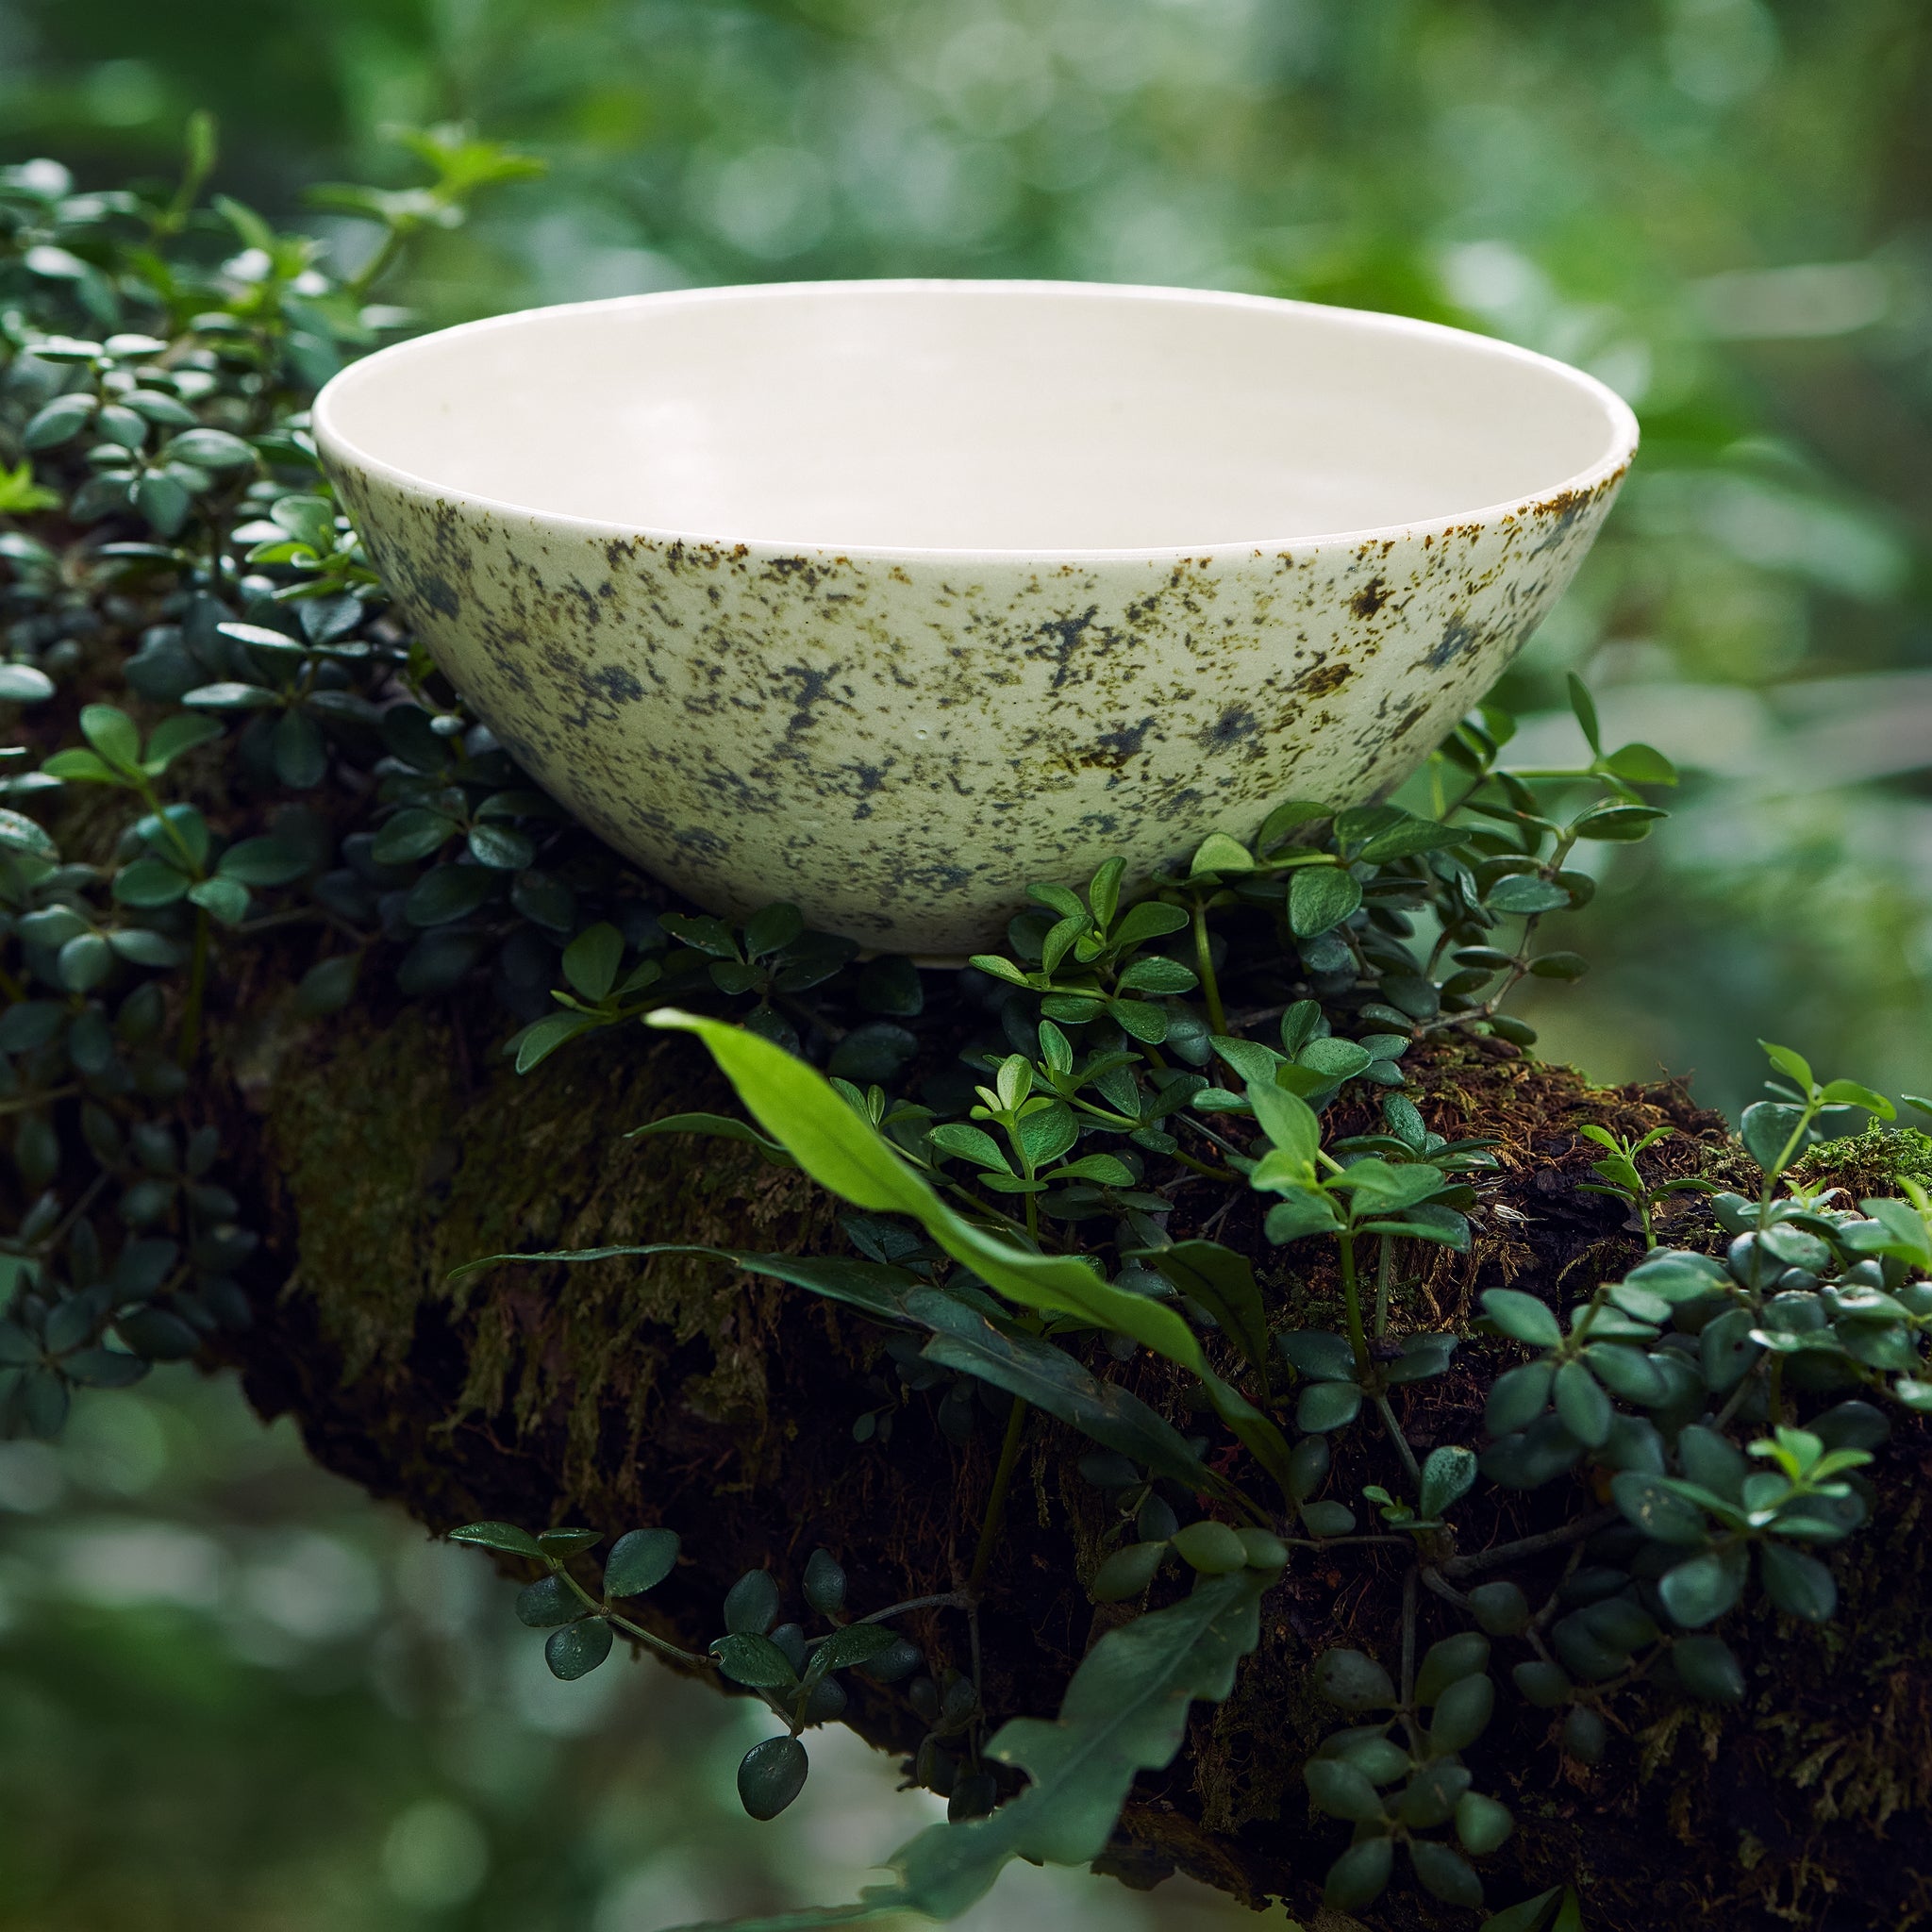 The Aged Moss Bowl